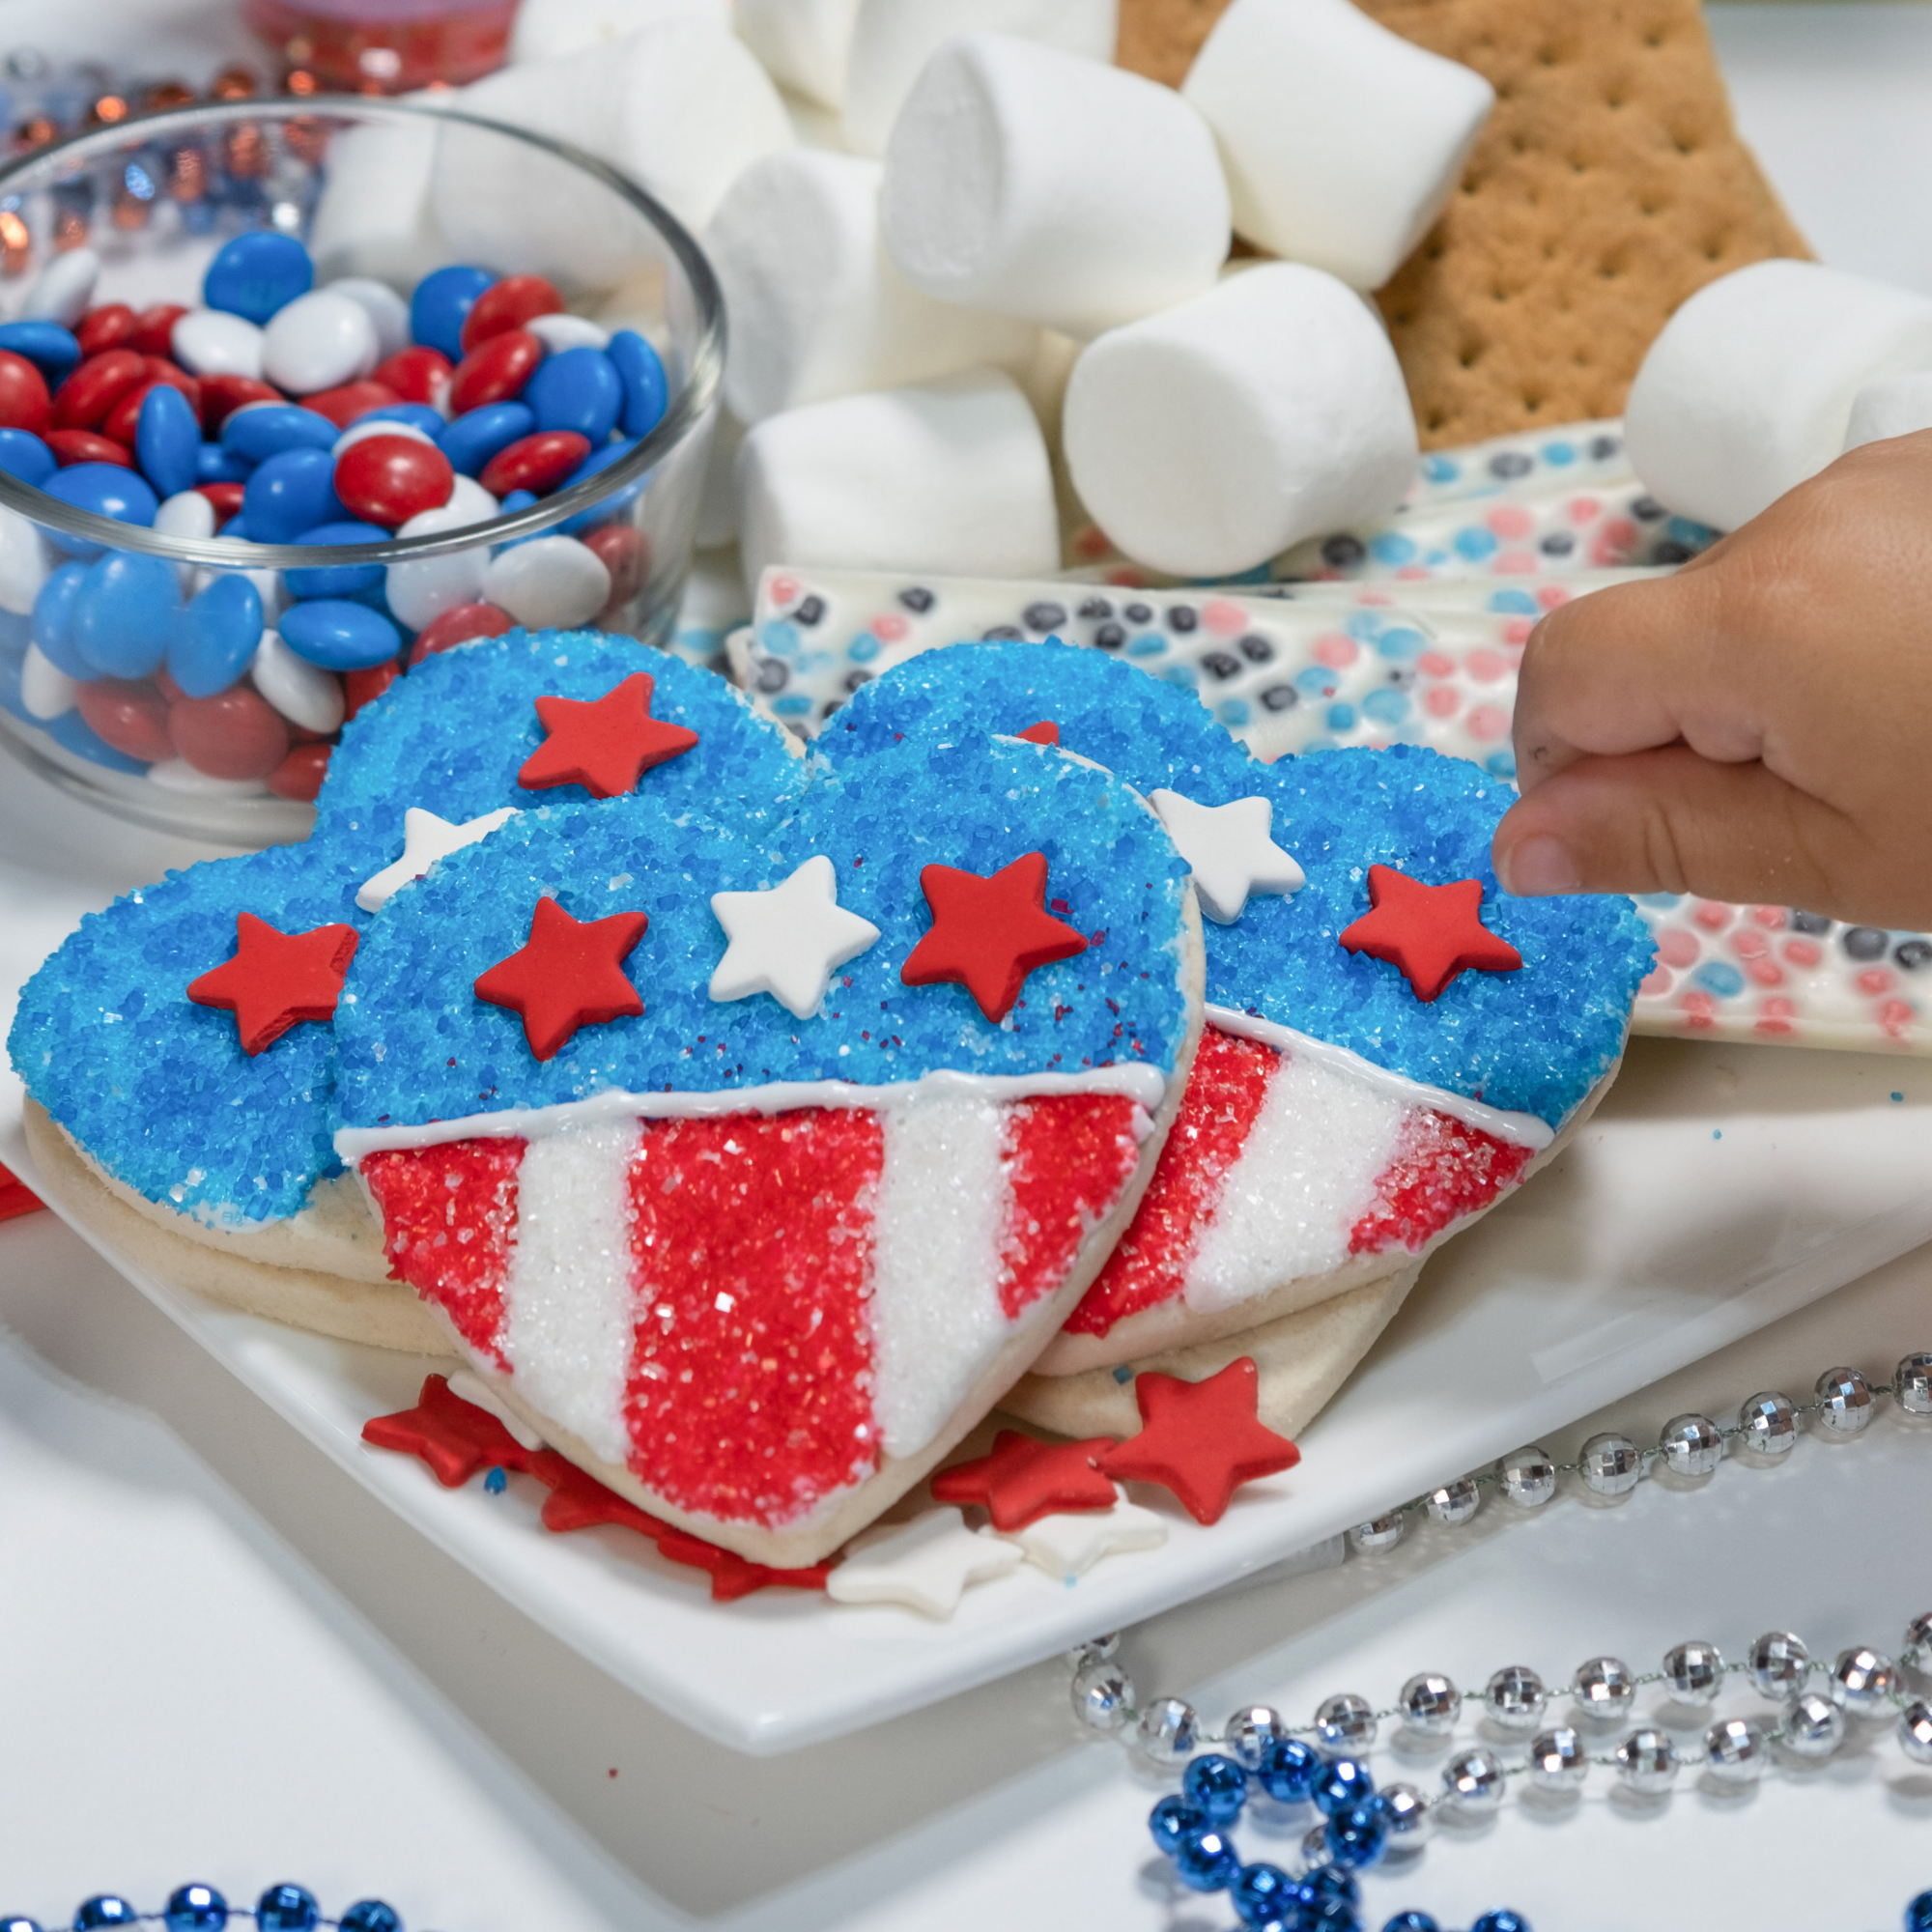 4th of July Bundle (Flag Cookie Kit + Red, White and Blue Glittery Sugar)